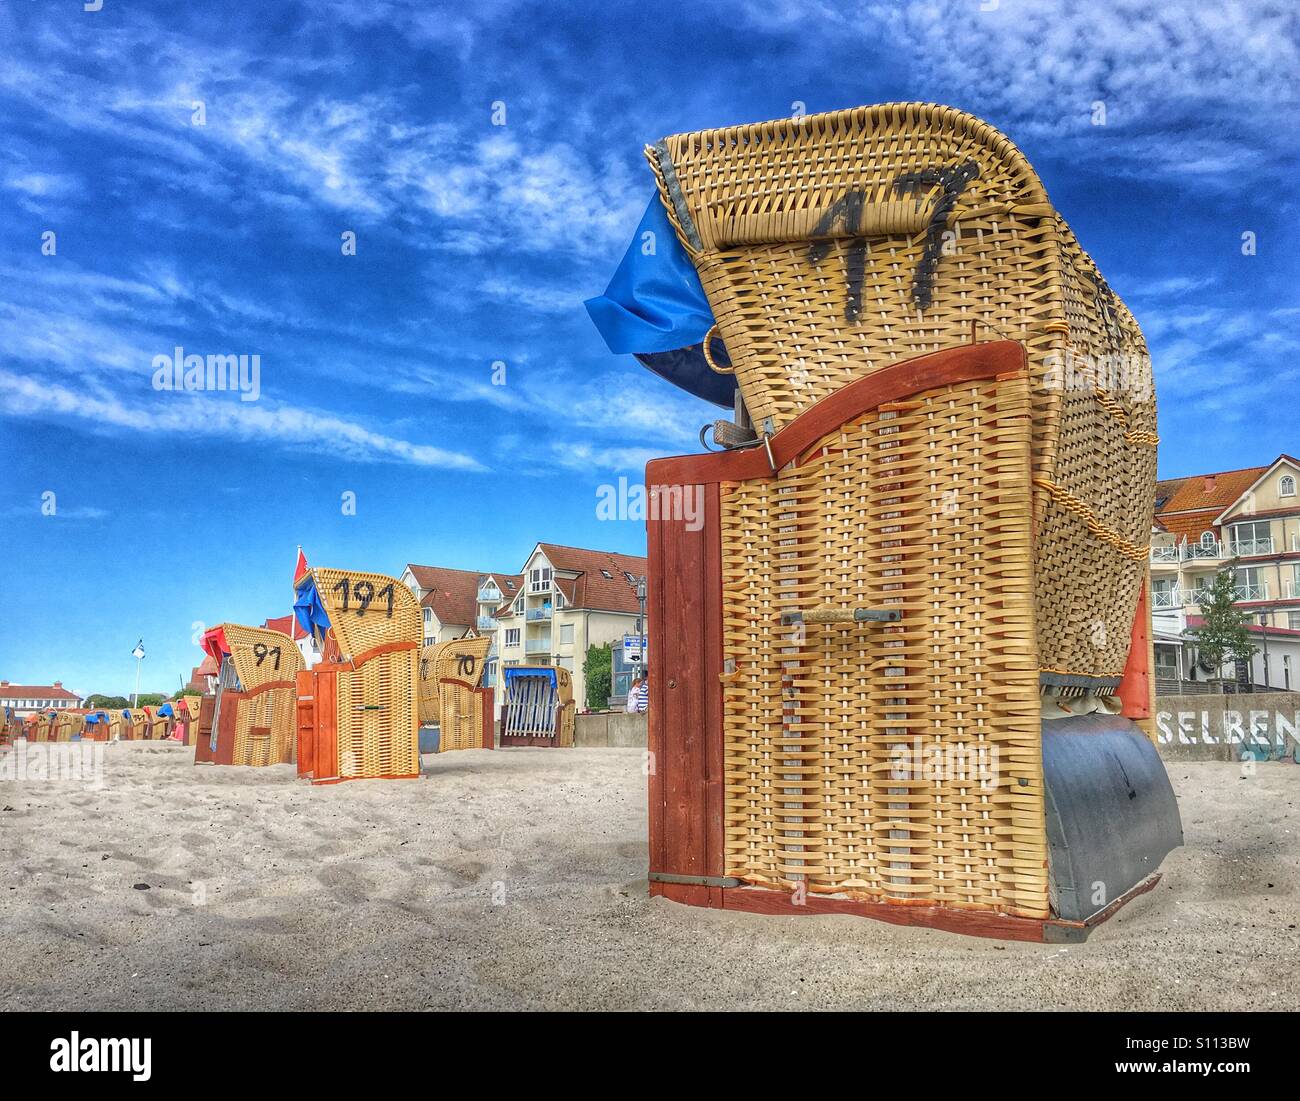 Beach chair in Laboe, Germany Stock Photo